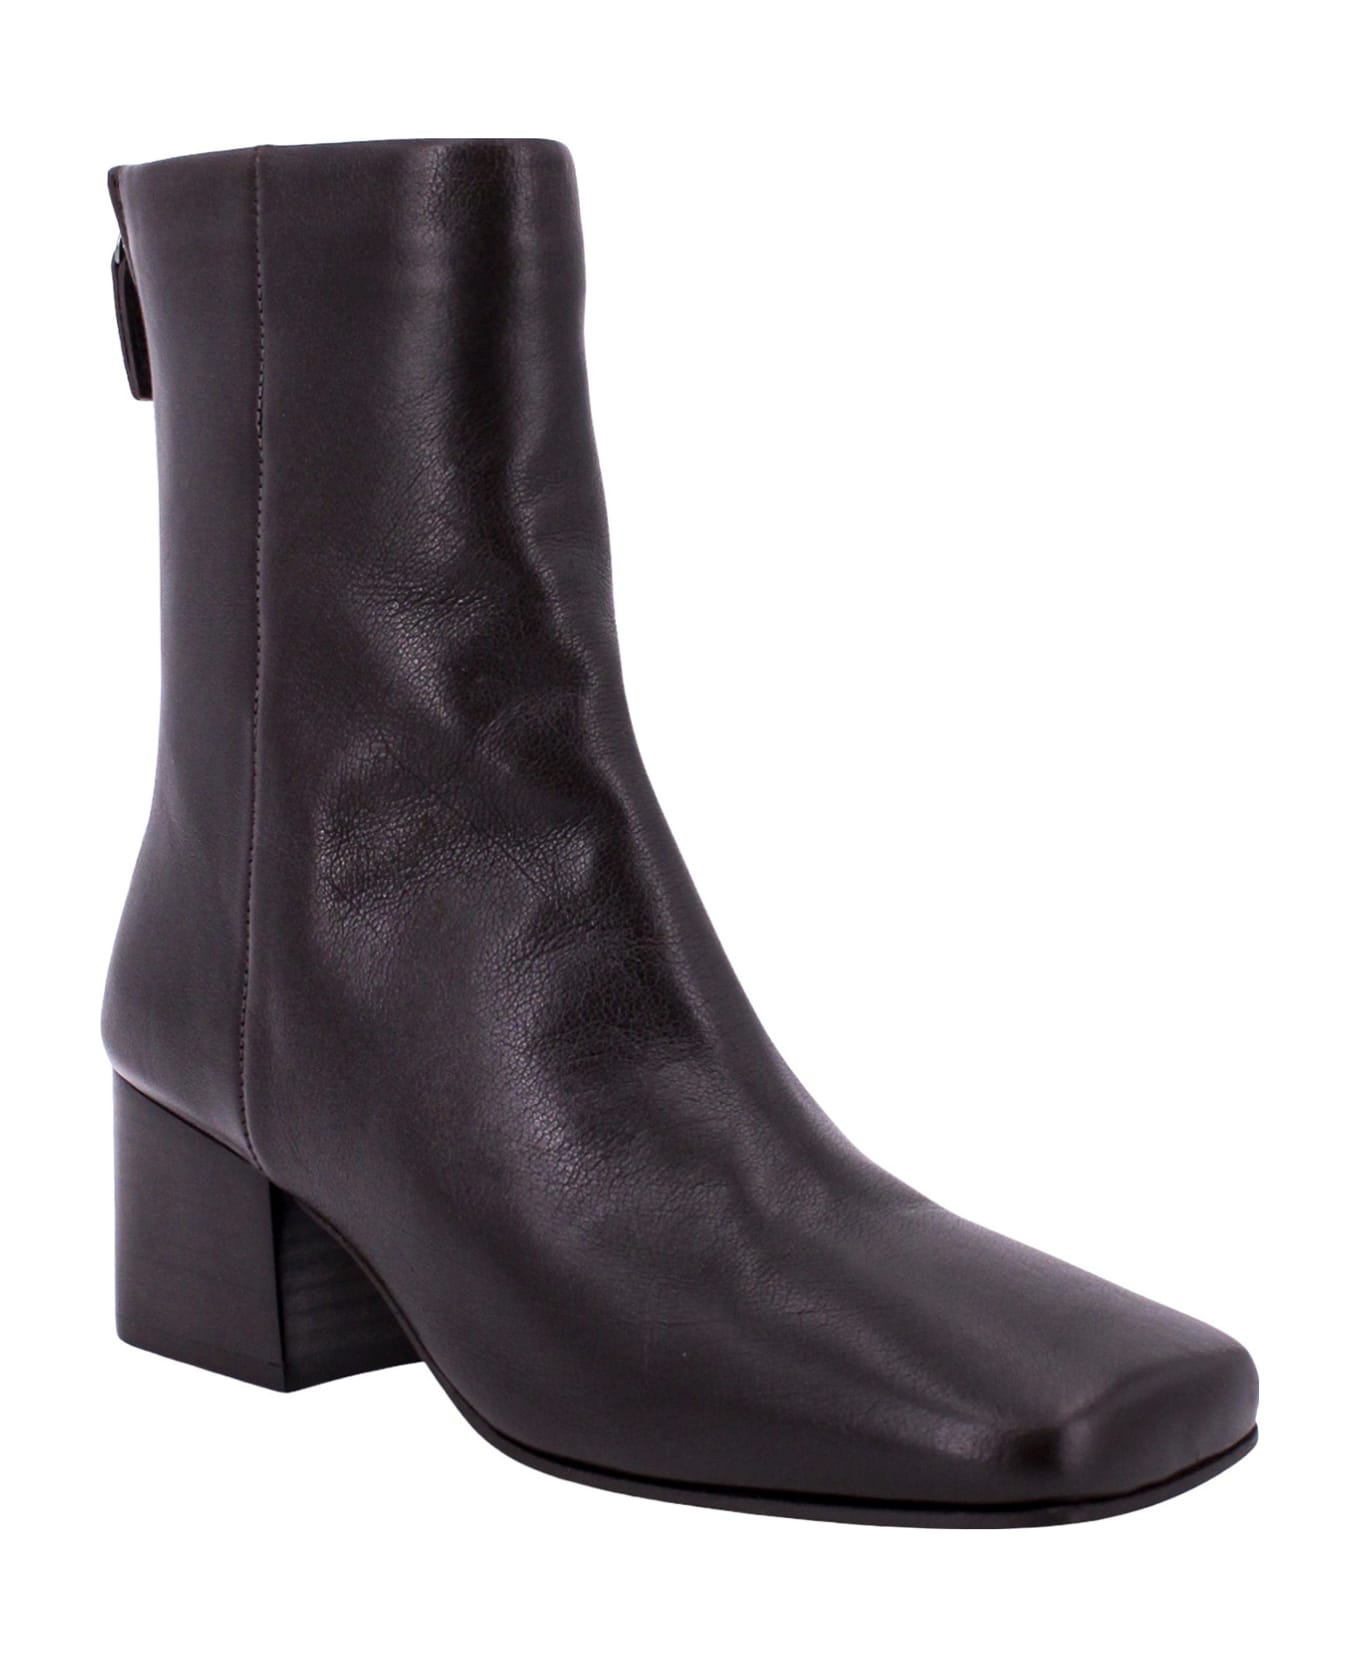 Lemaire Ankle Boots - Dark Chocolate ブーツ